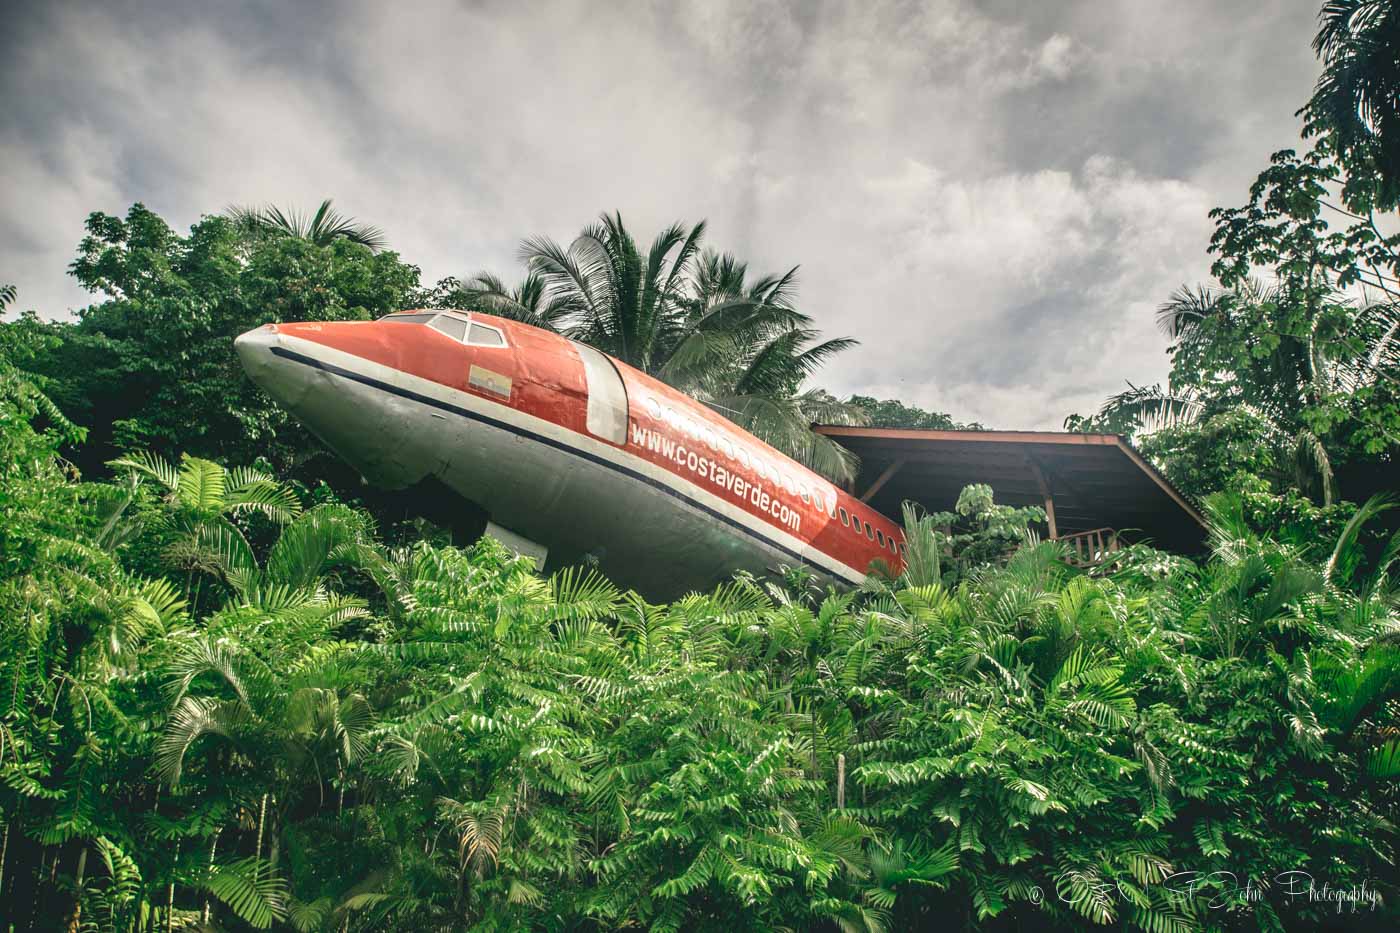 Staying at Hotel Costa Verde, Costa Rica- The World Famous Airplane Hotel